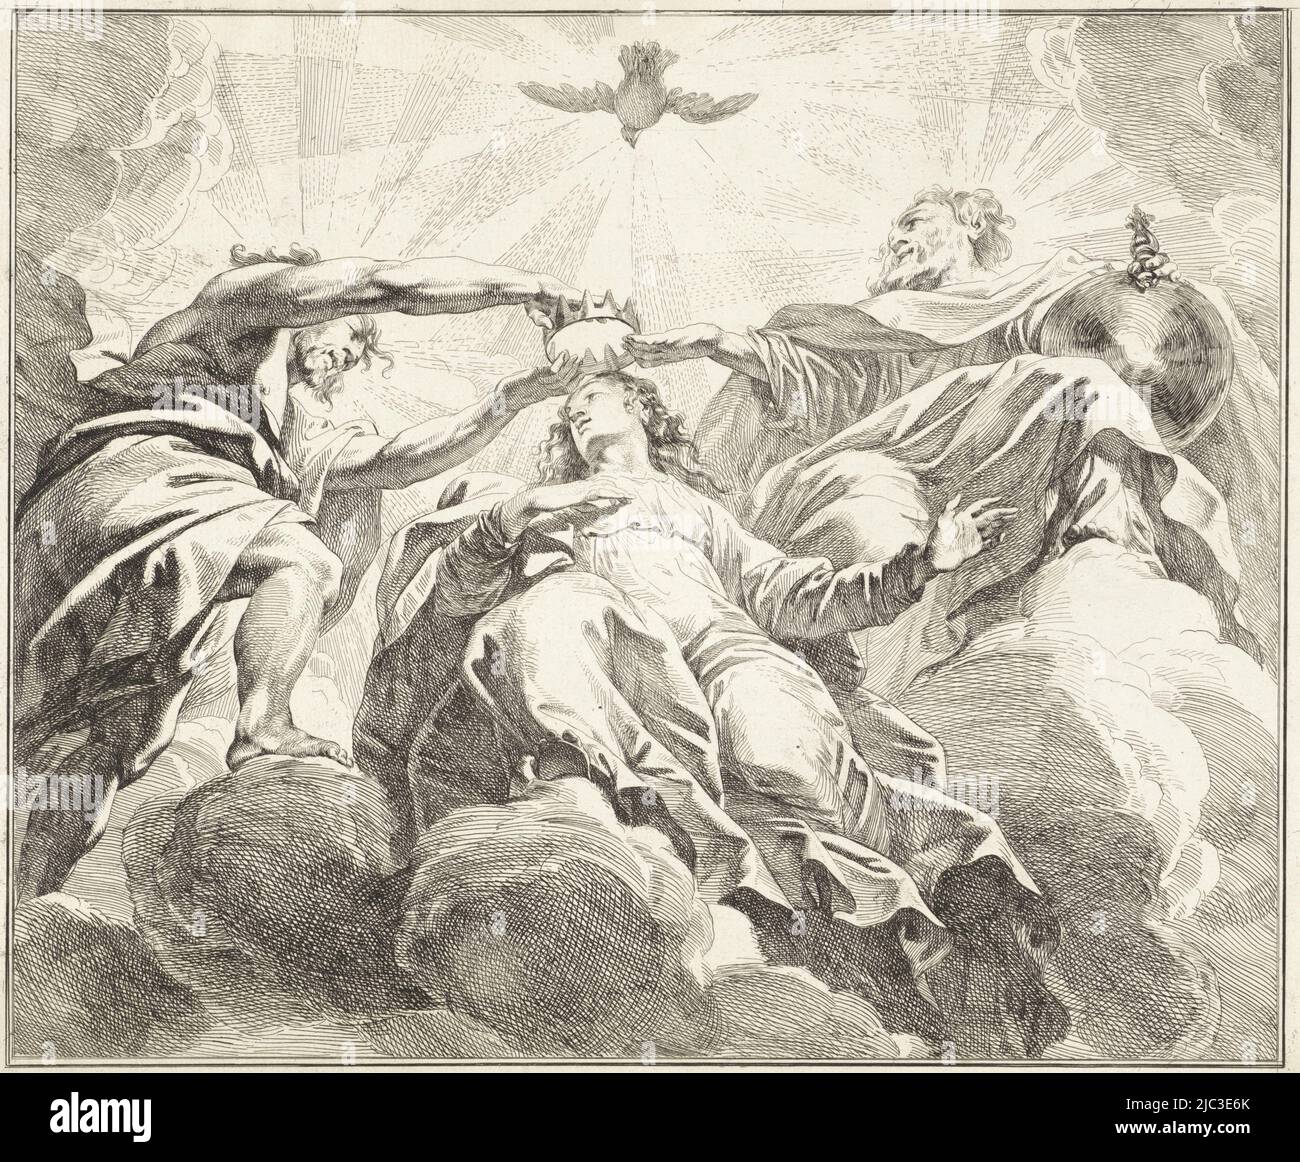 Mary is crowned in heaven by God the father and by Christ, above them the Holy Spirit in the form of a dove, Coronation of Mary, print maker: Jacob de Wit, after: Peter Paul Rubens, Amsterdam, 1705 - 1754, paper, etching, h  mm × w  mm, w 402 mm ×  338 mm Stock Photo